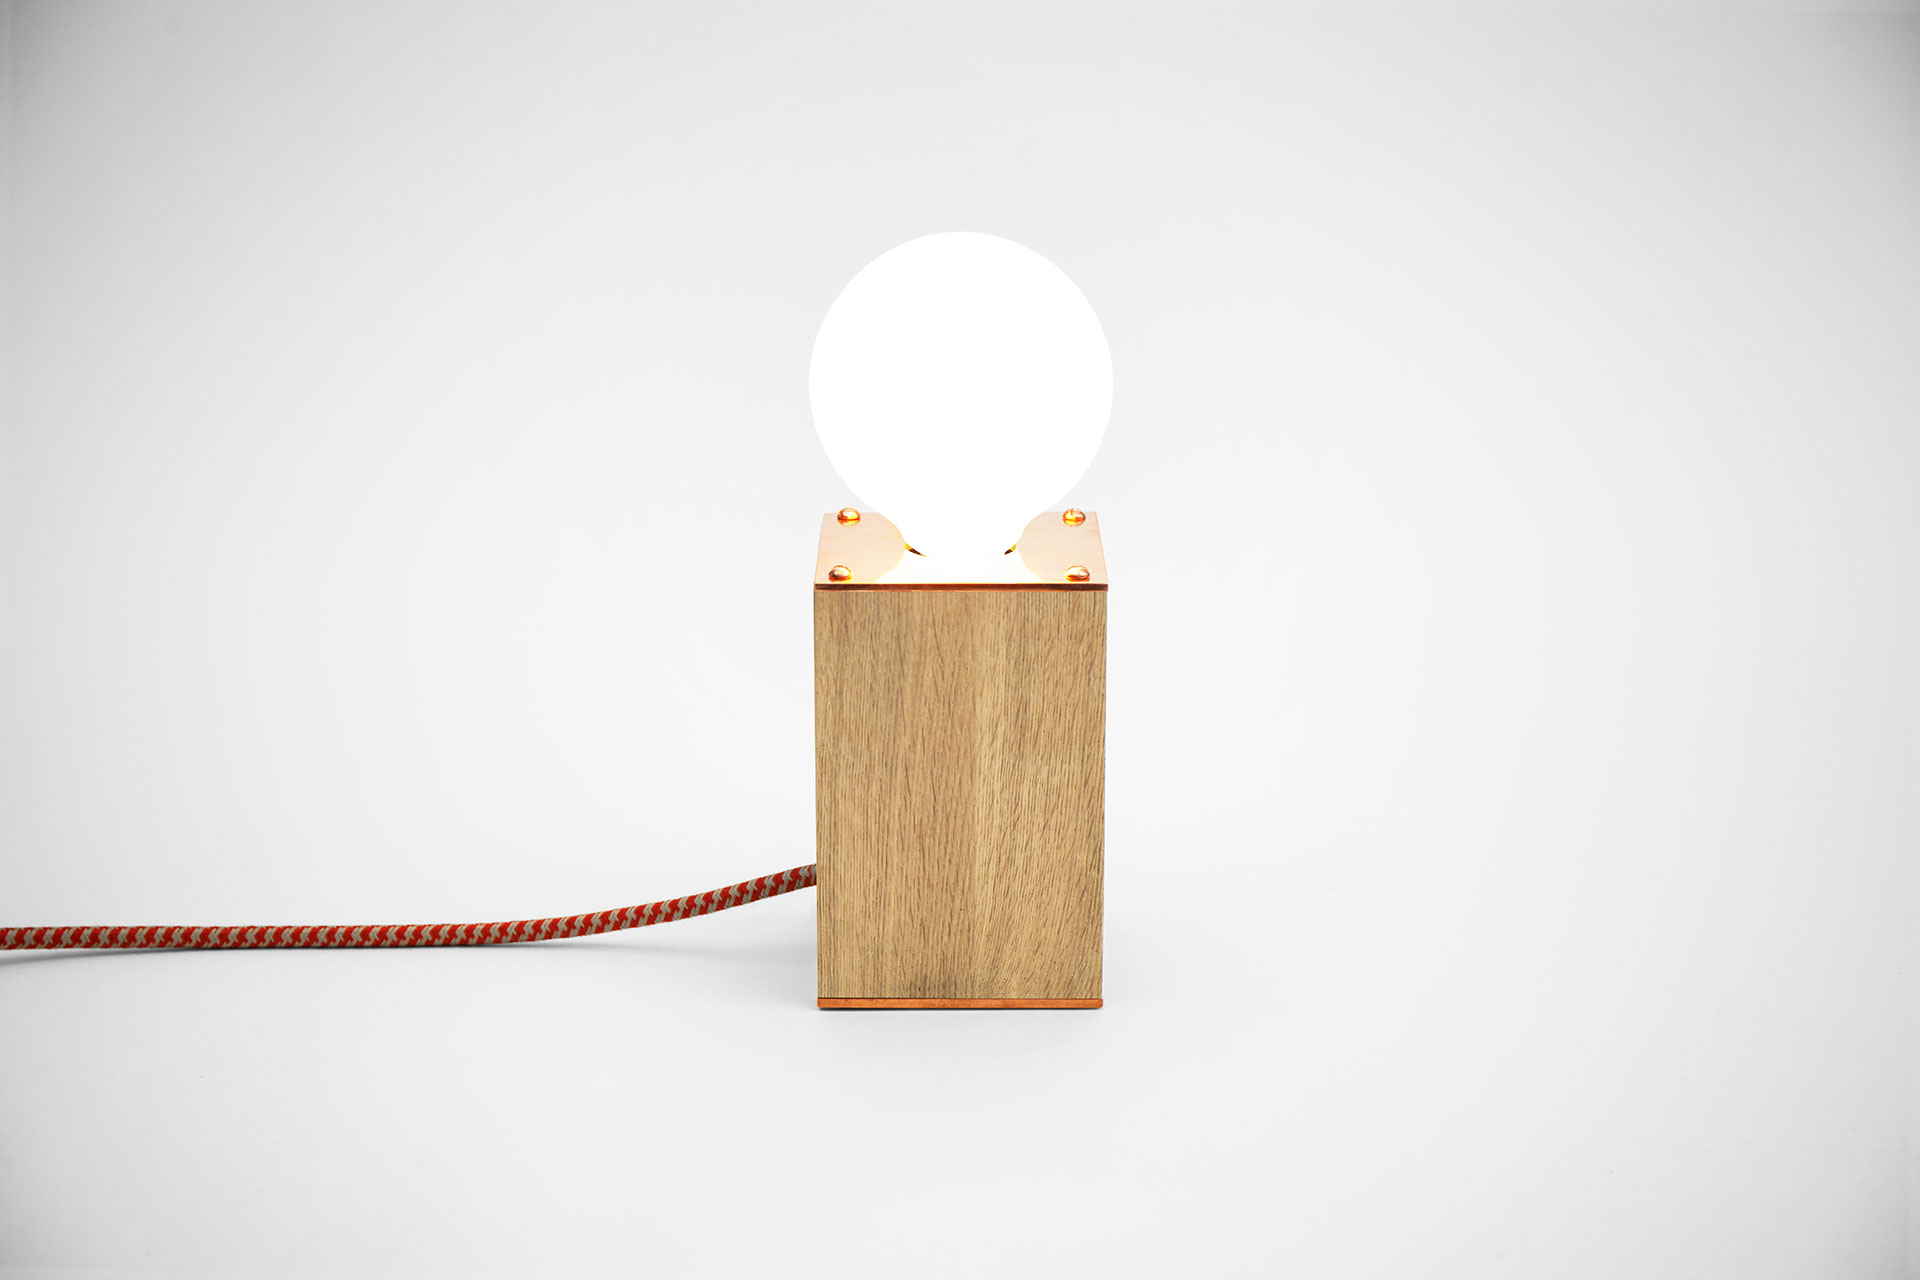 Simple bedside lamp in oak wood and fashionable copper with functional touch dimmer inspired by scandinavian design